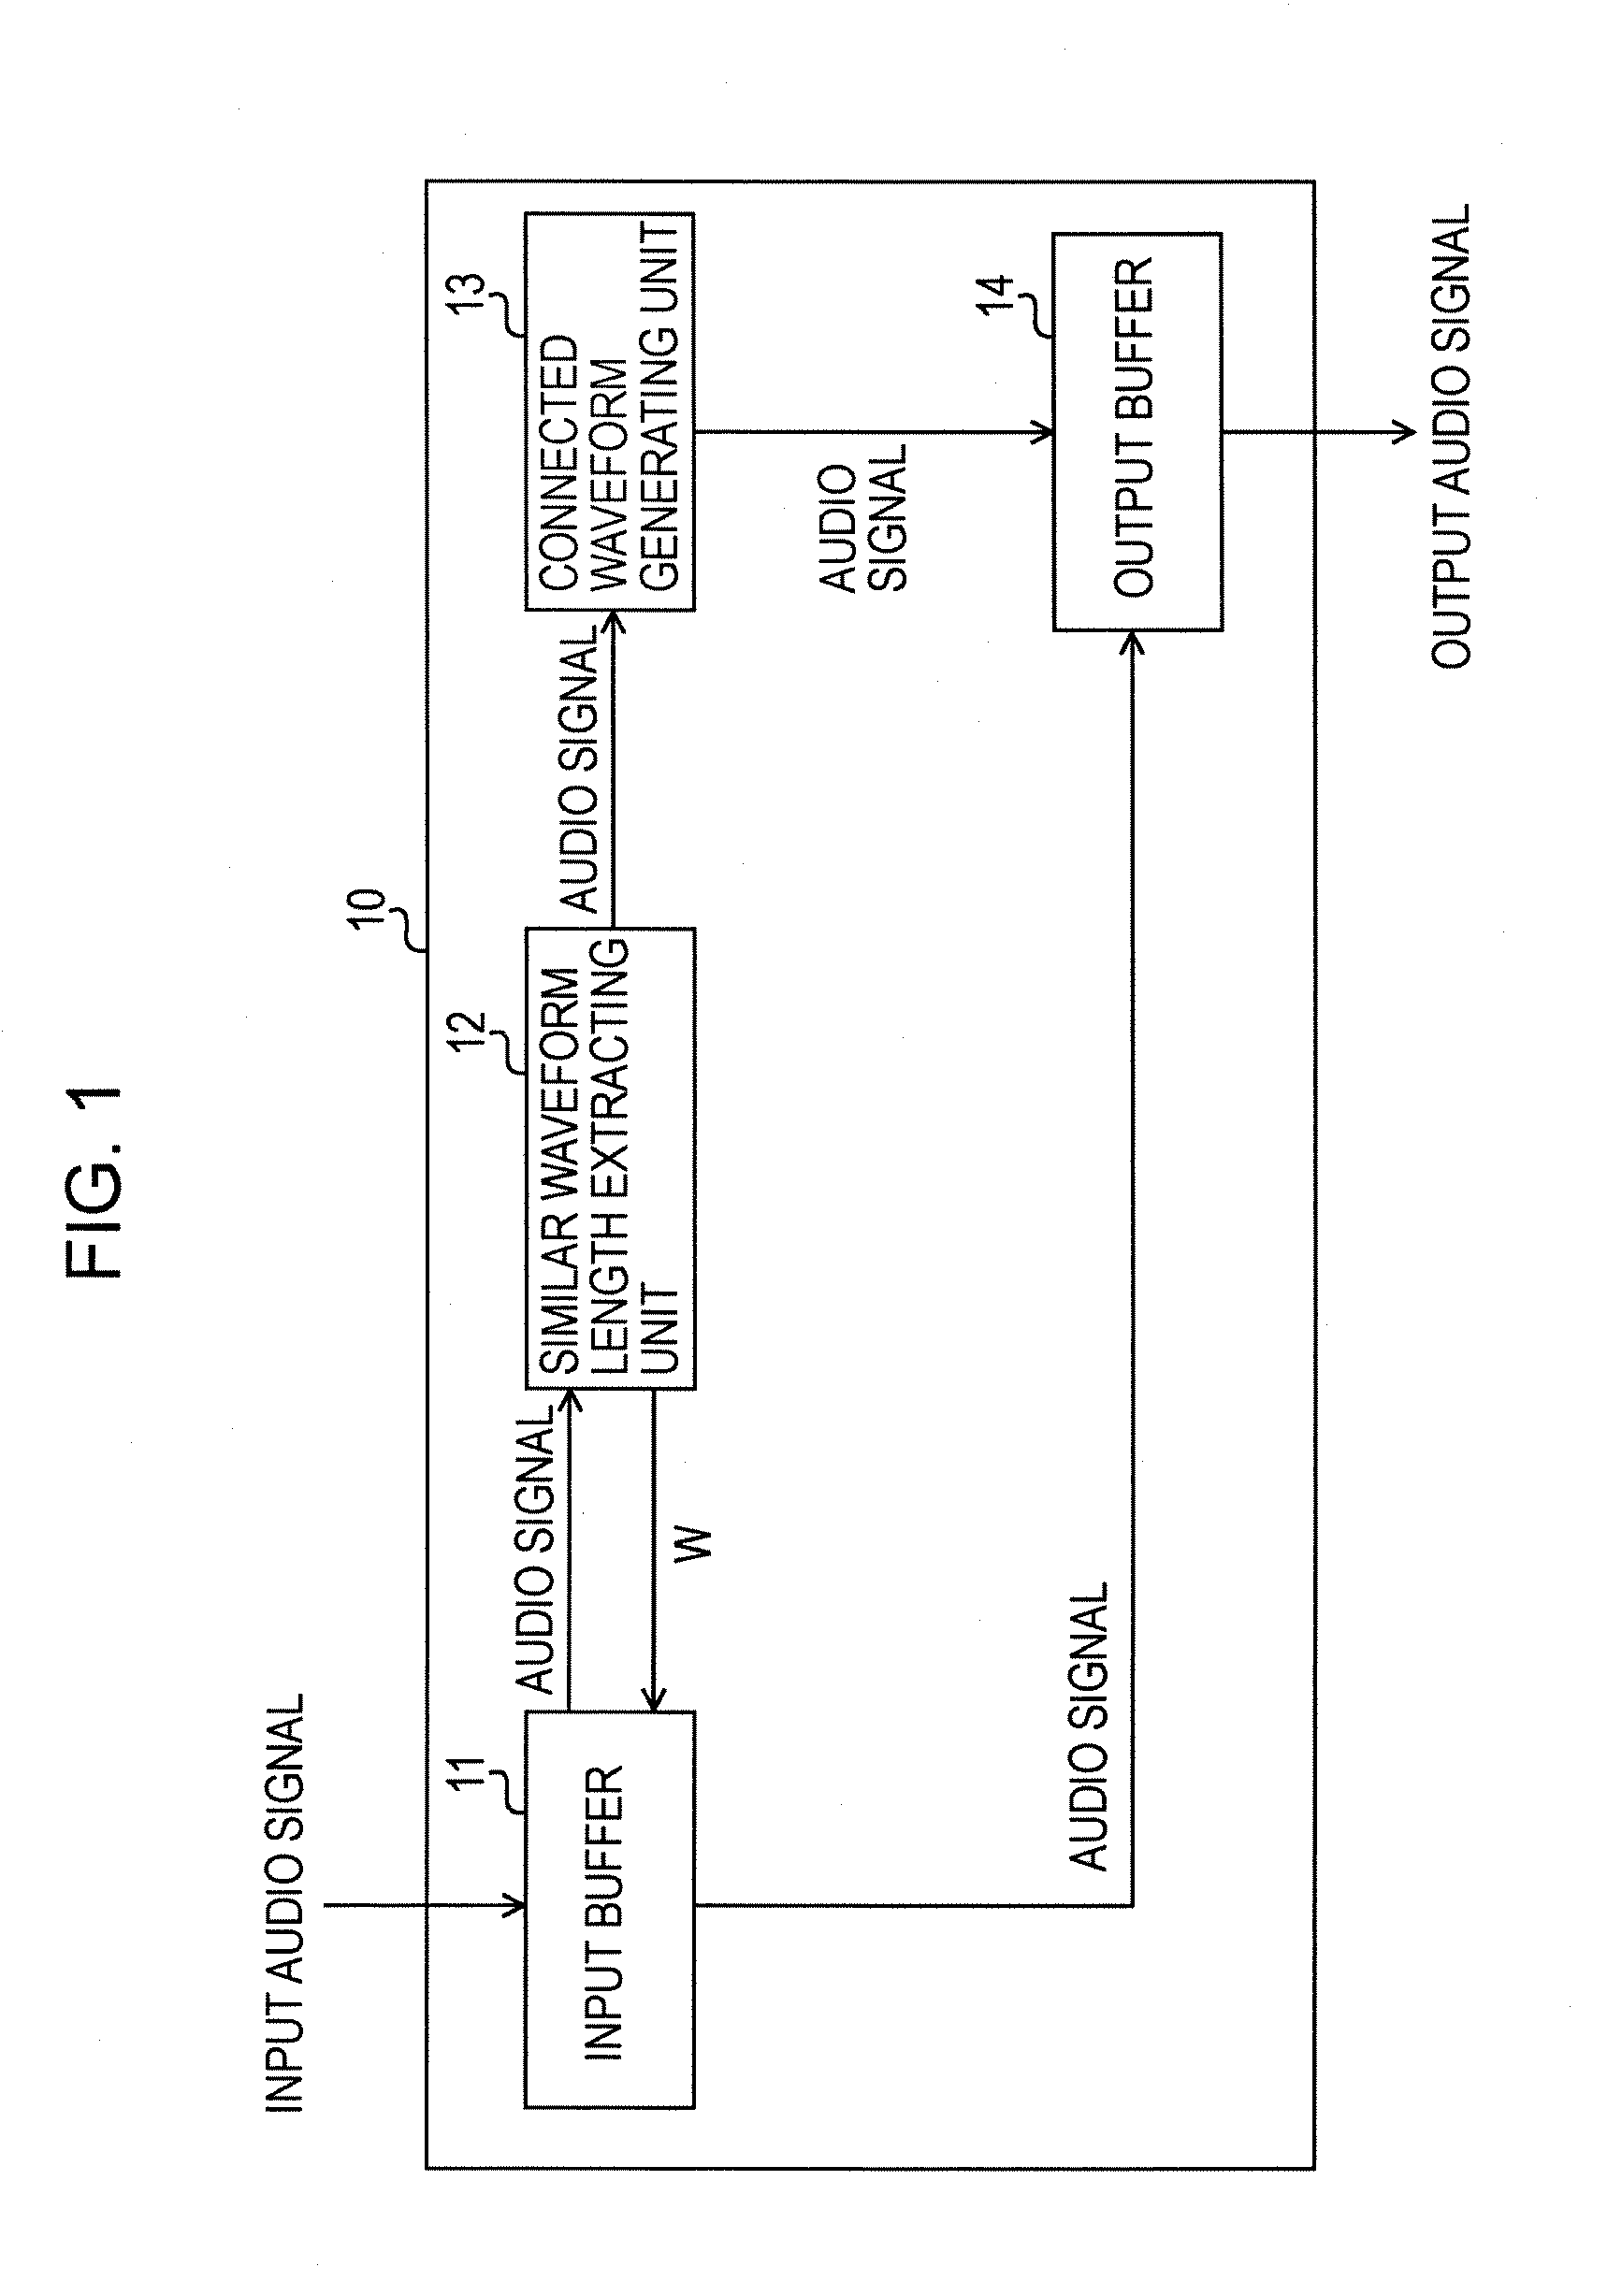 Method and Apparatus for Audio Signal Expansion and Compression